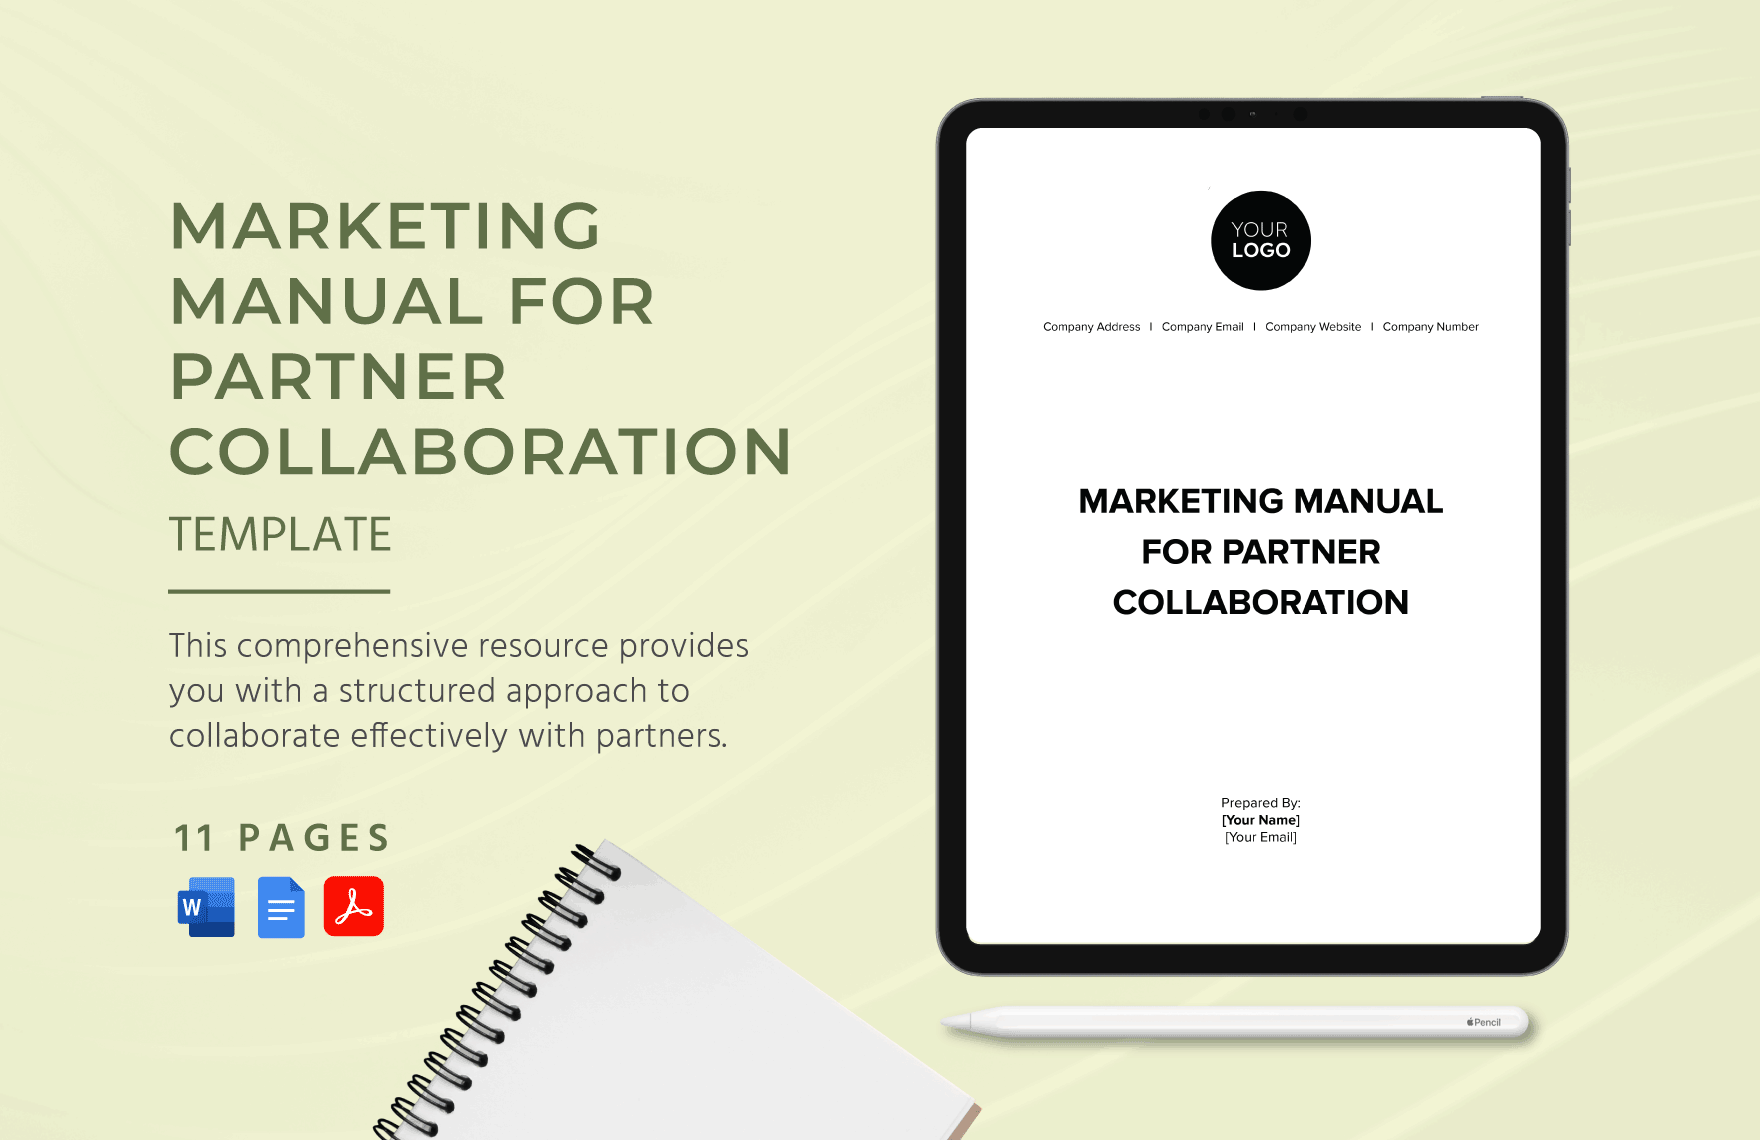 Marketing Manual for Partner Collaboration Template